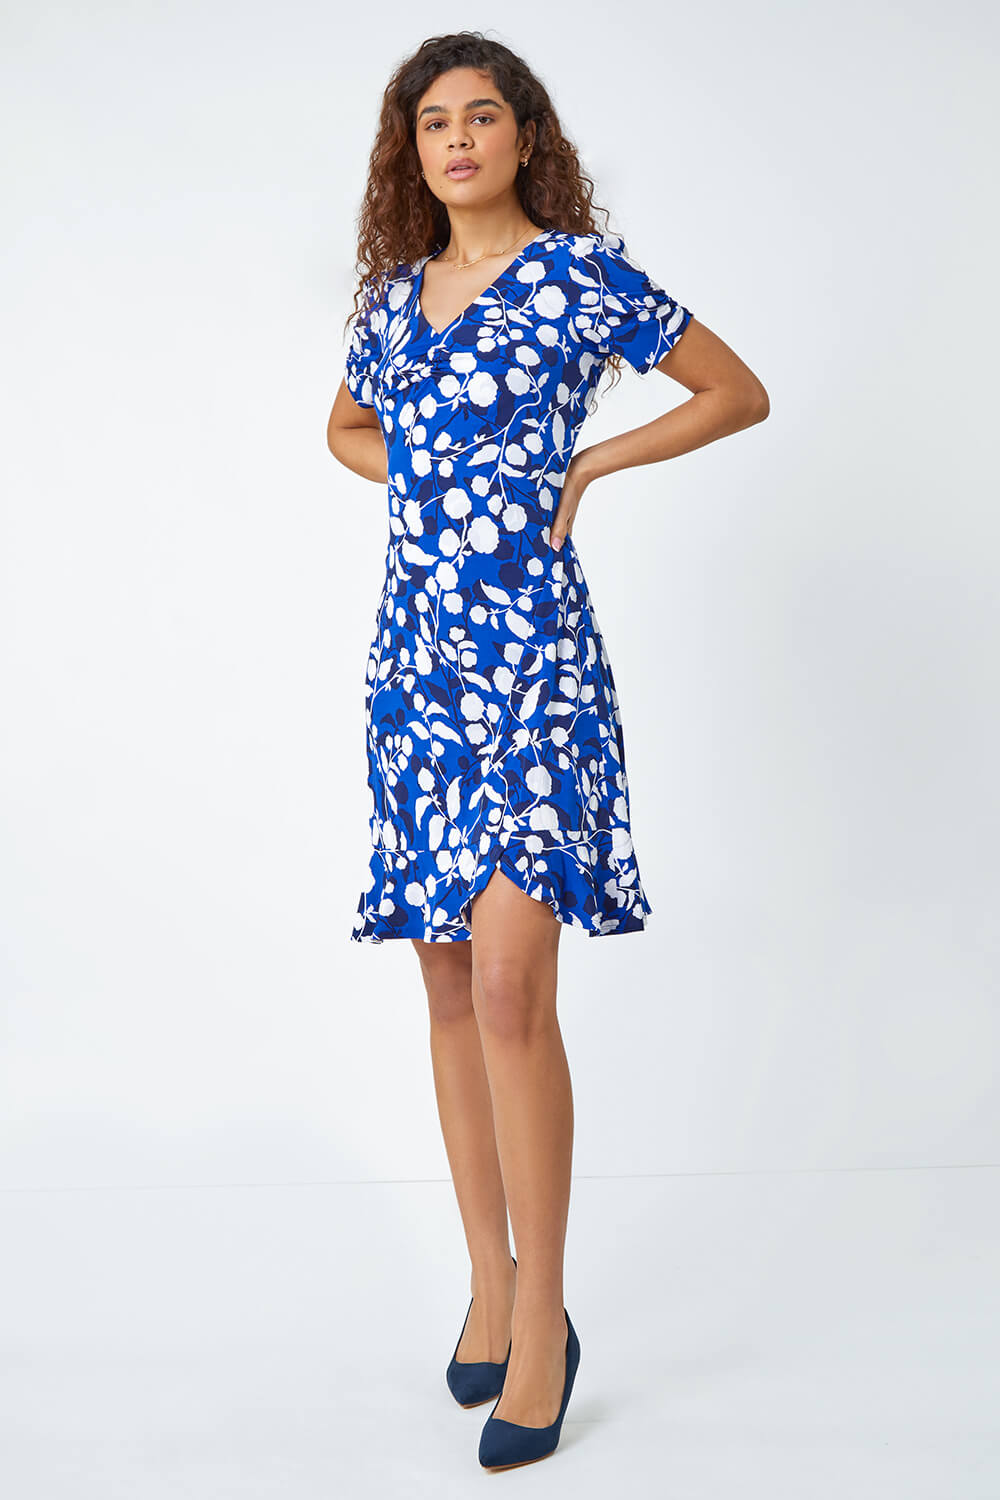 Royal Blue Textured Floral Ruched Stretch Dress, Image 2 of 5